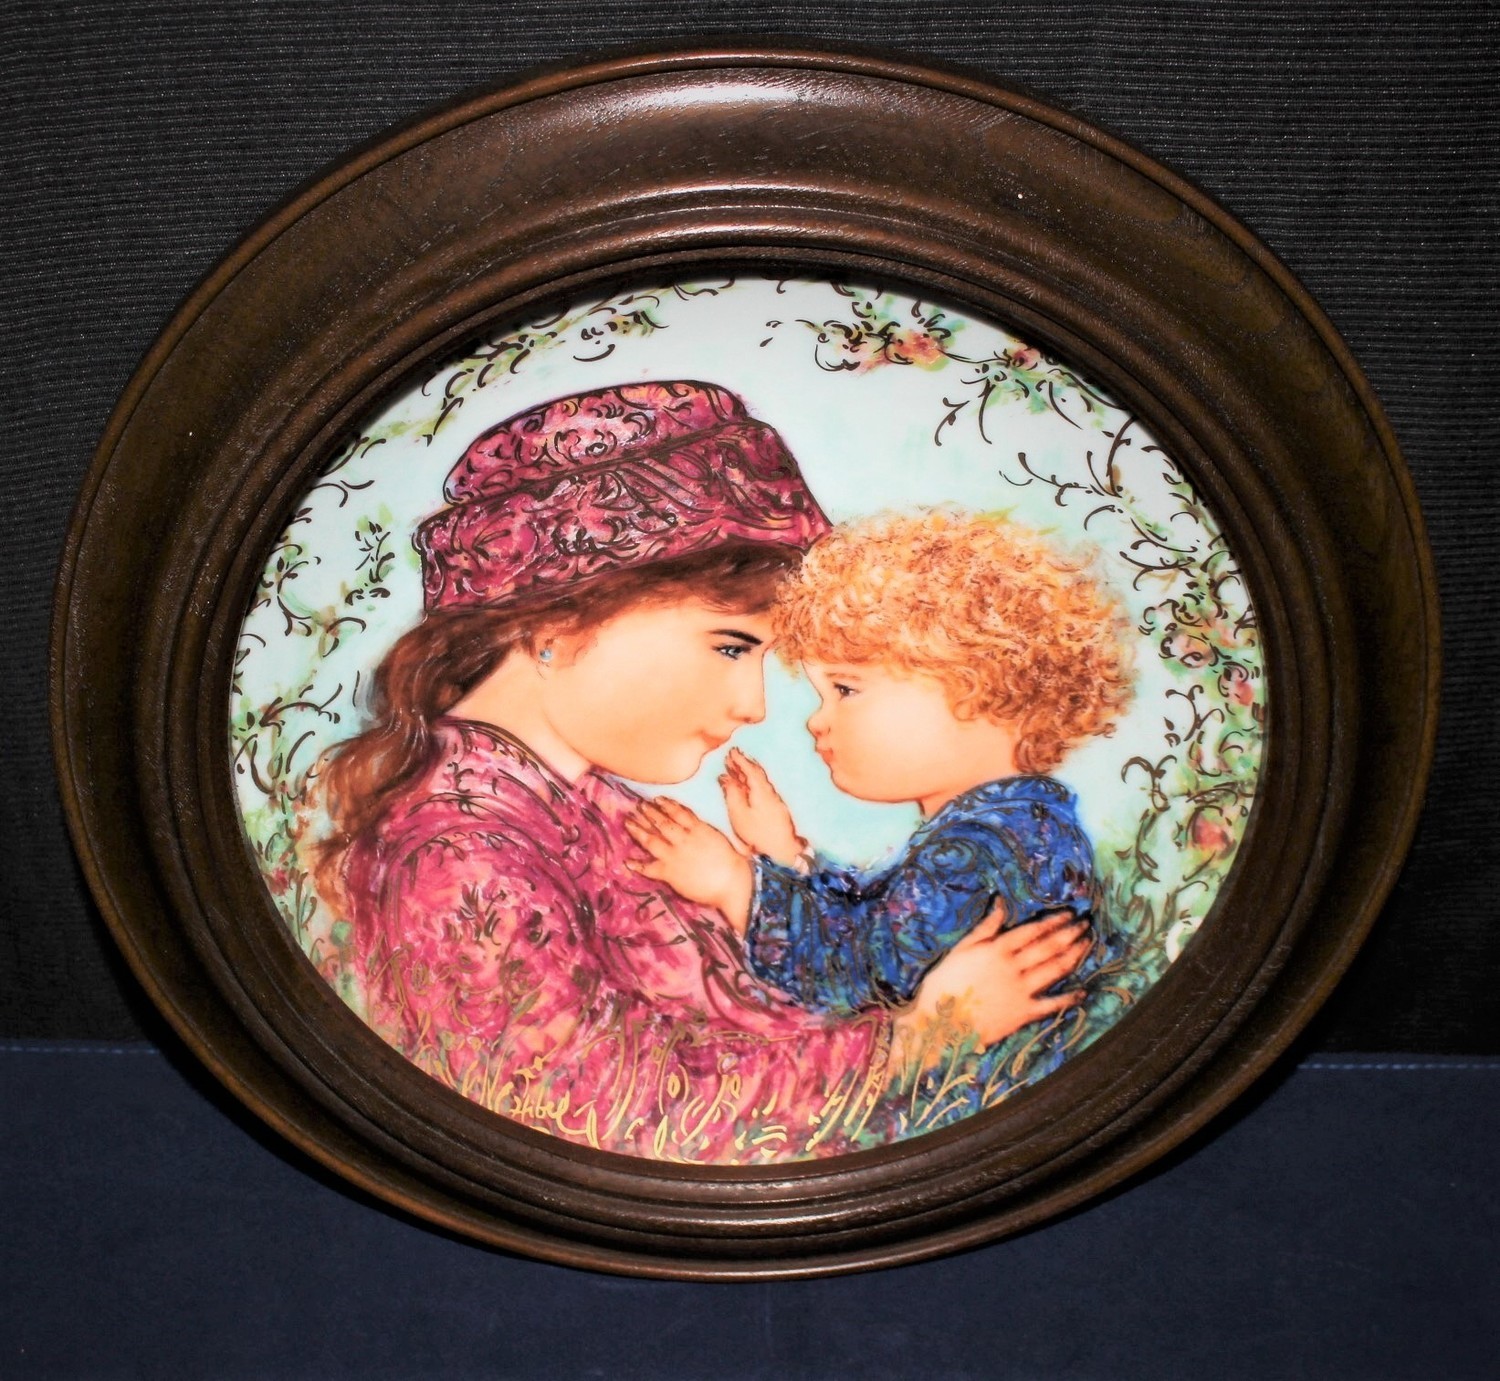 Knowles 1988 Mother’s Day “Sarah & Tess” by Edna Hibel Framed Plate, #2880A